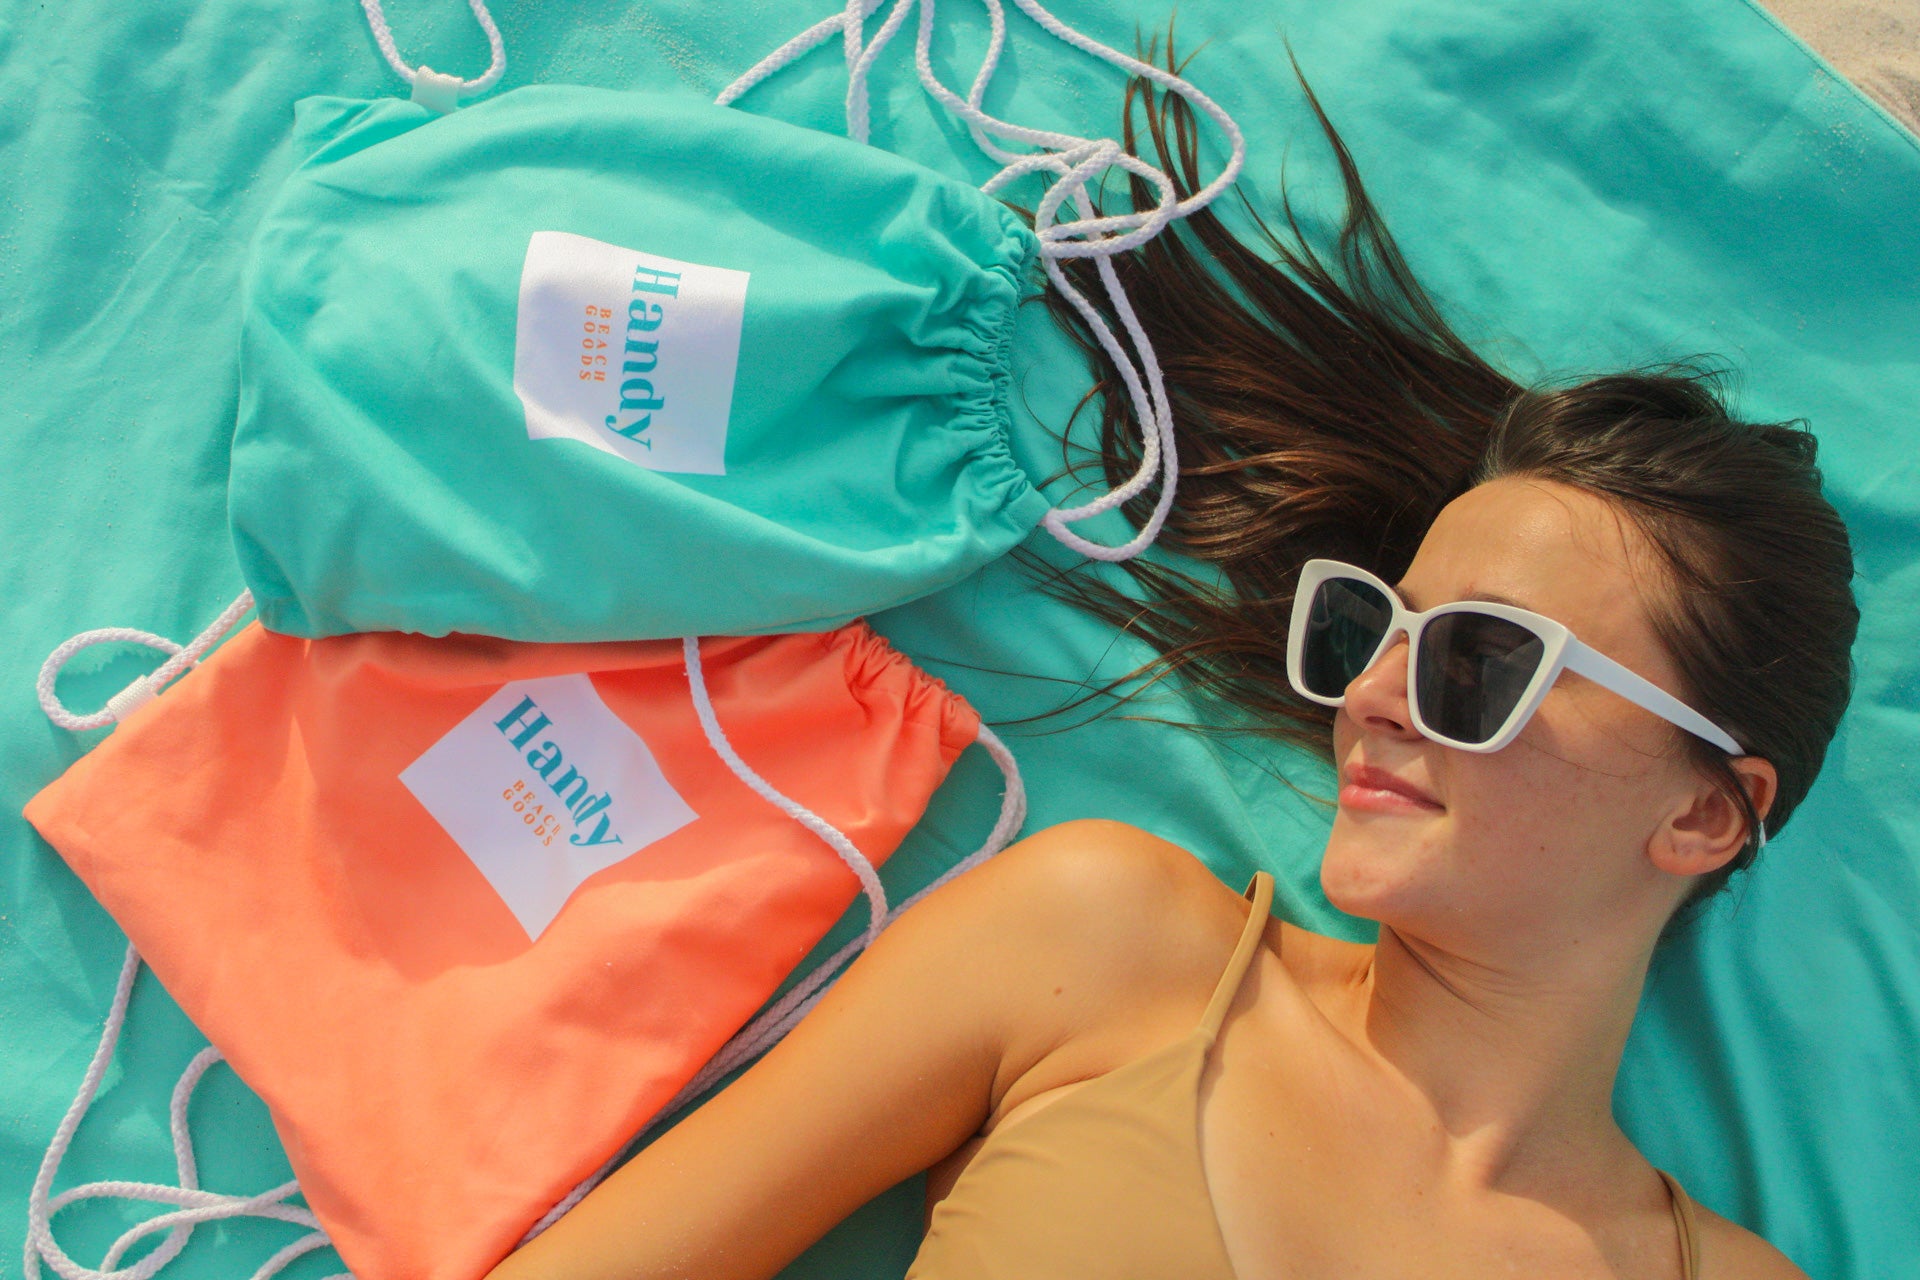 Lying on the Handy Beach Mat, the perfect accessory for beach relaxation